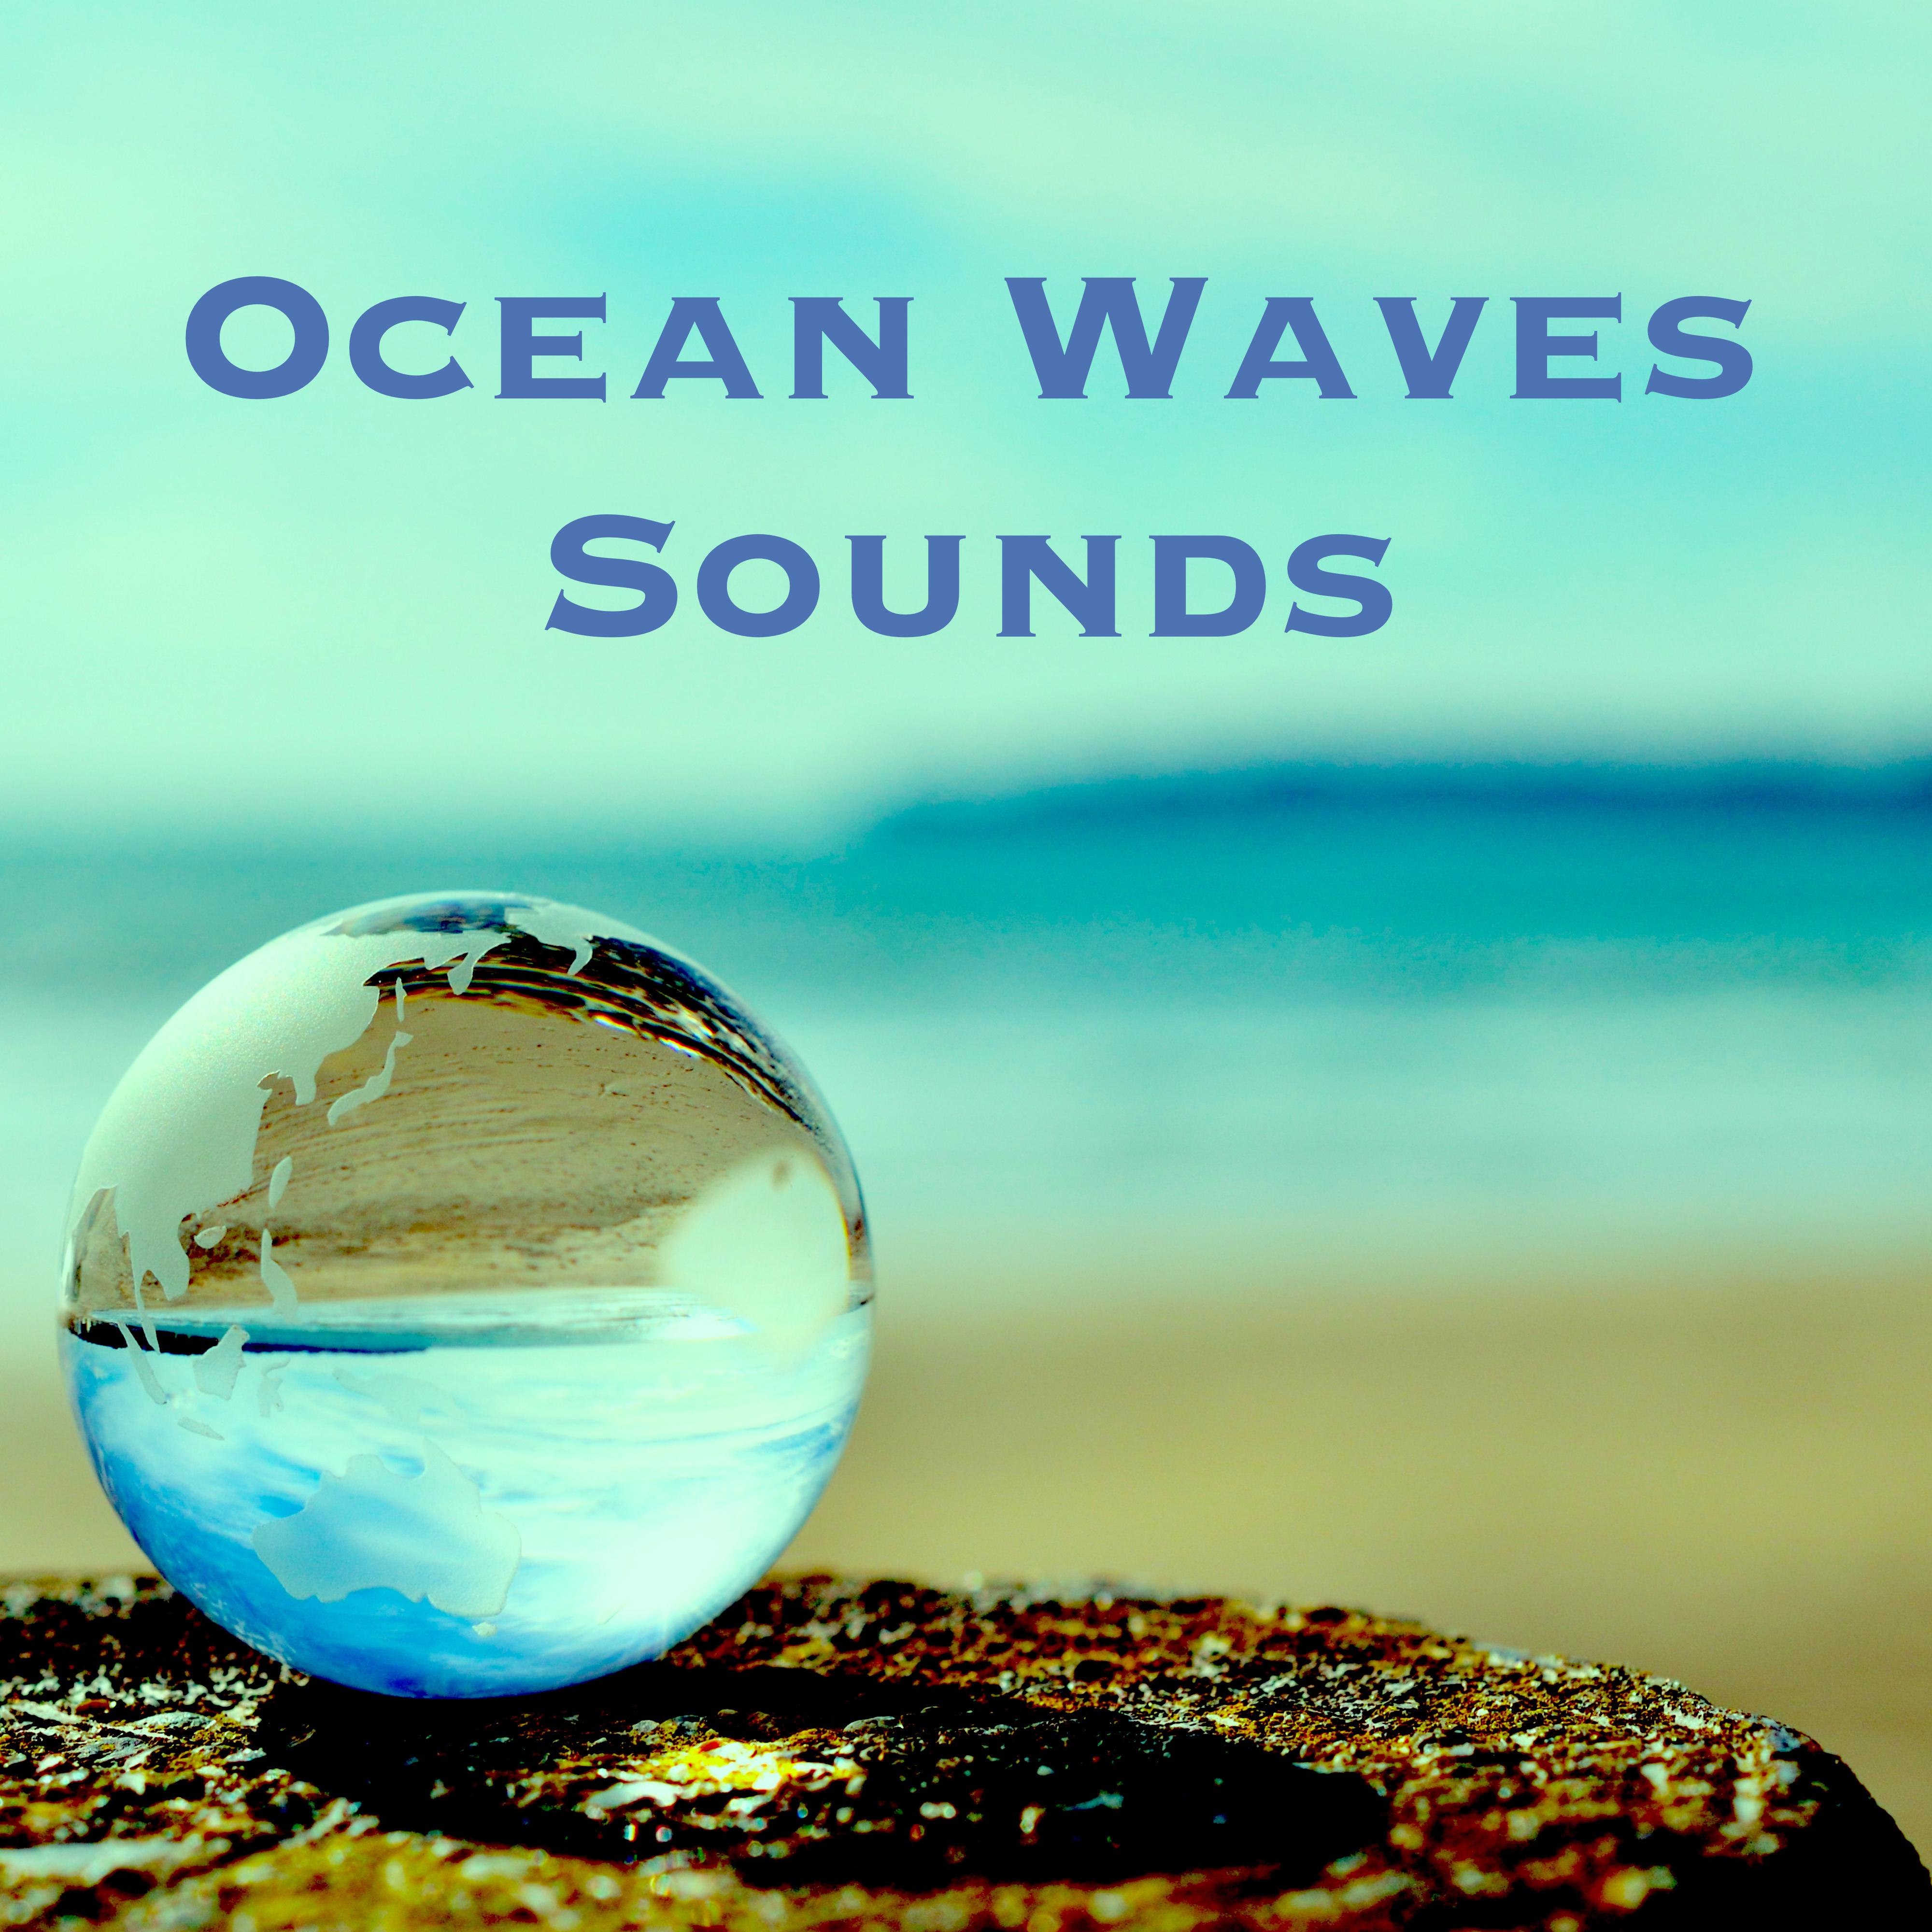 Ocean Waves Sounds  Healing Music to Cure Insomnia and Sleepwell, Songs for Yoga Meditation  Relaxation